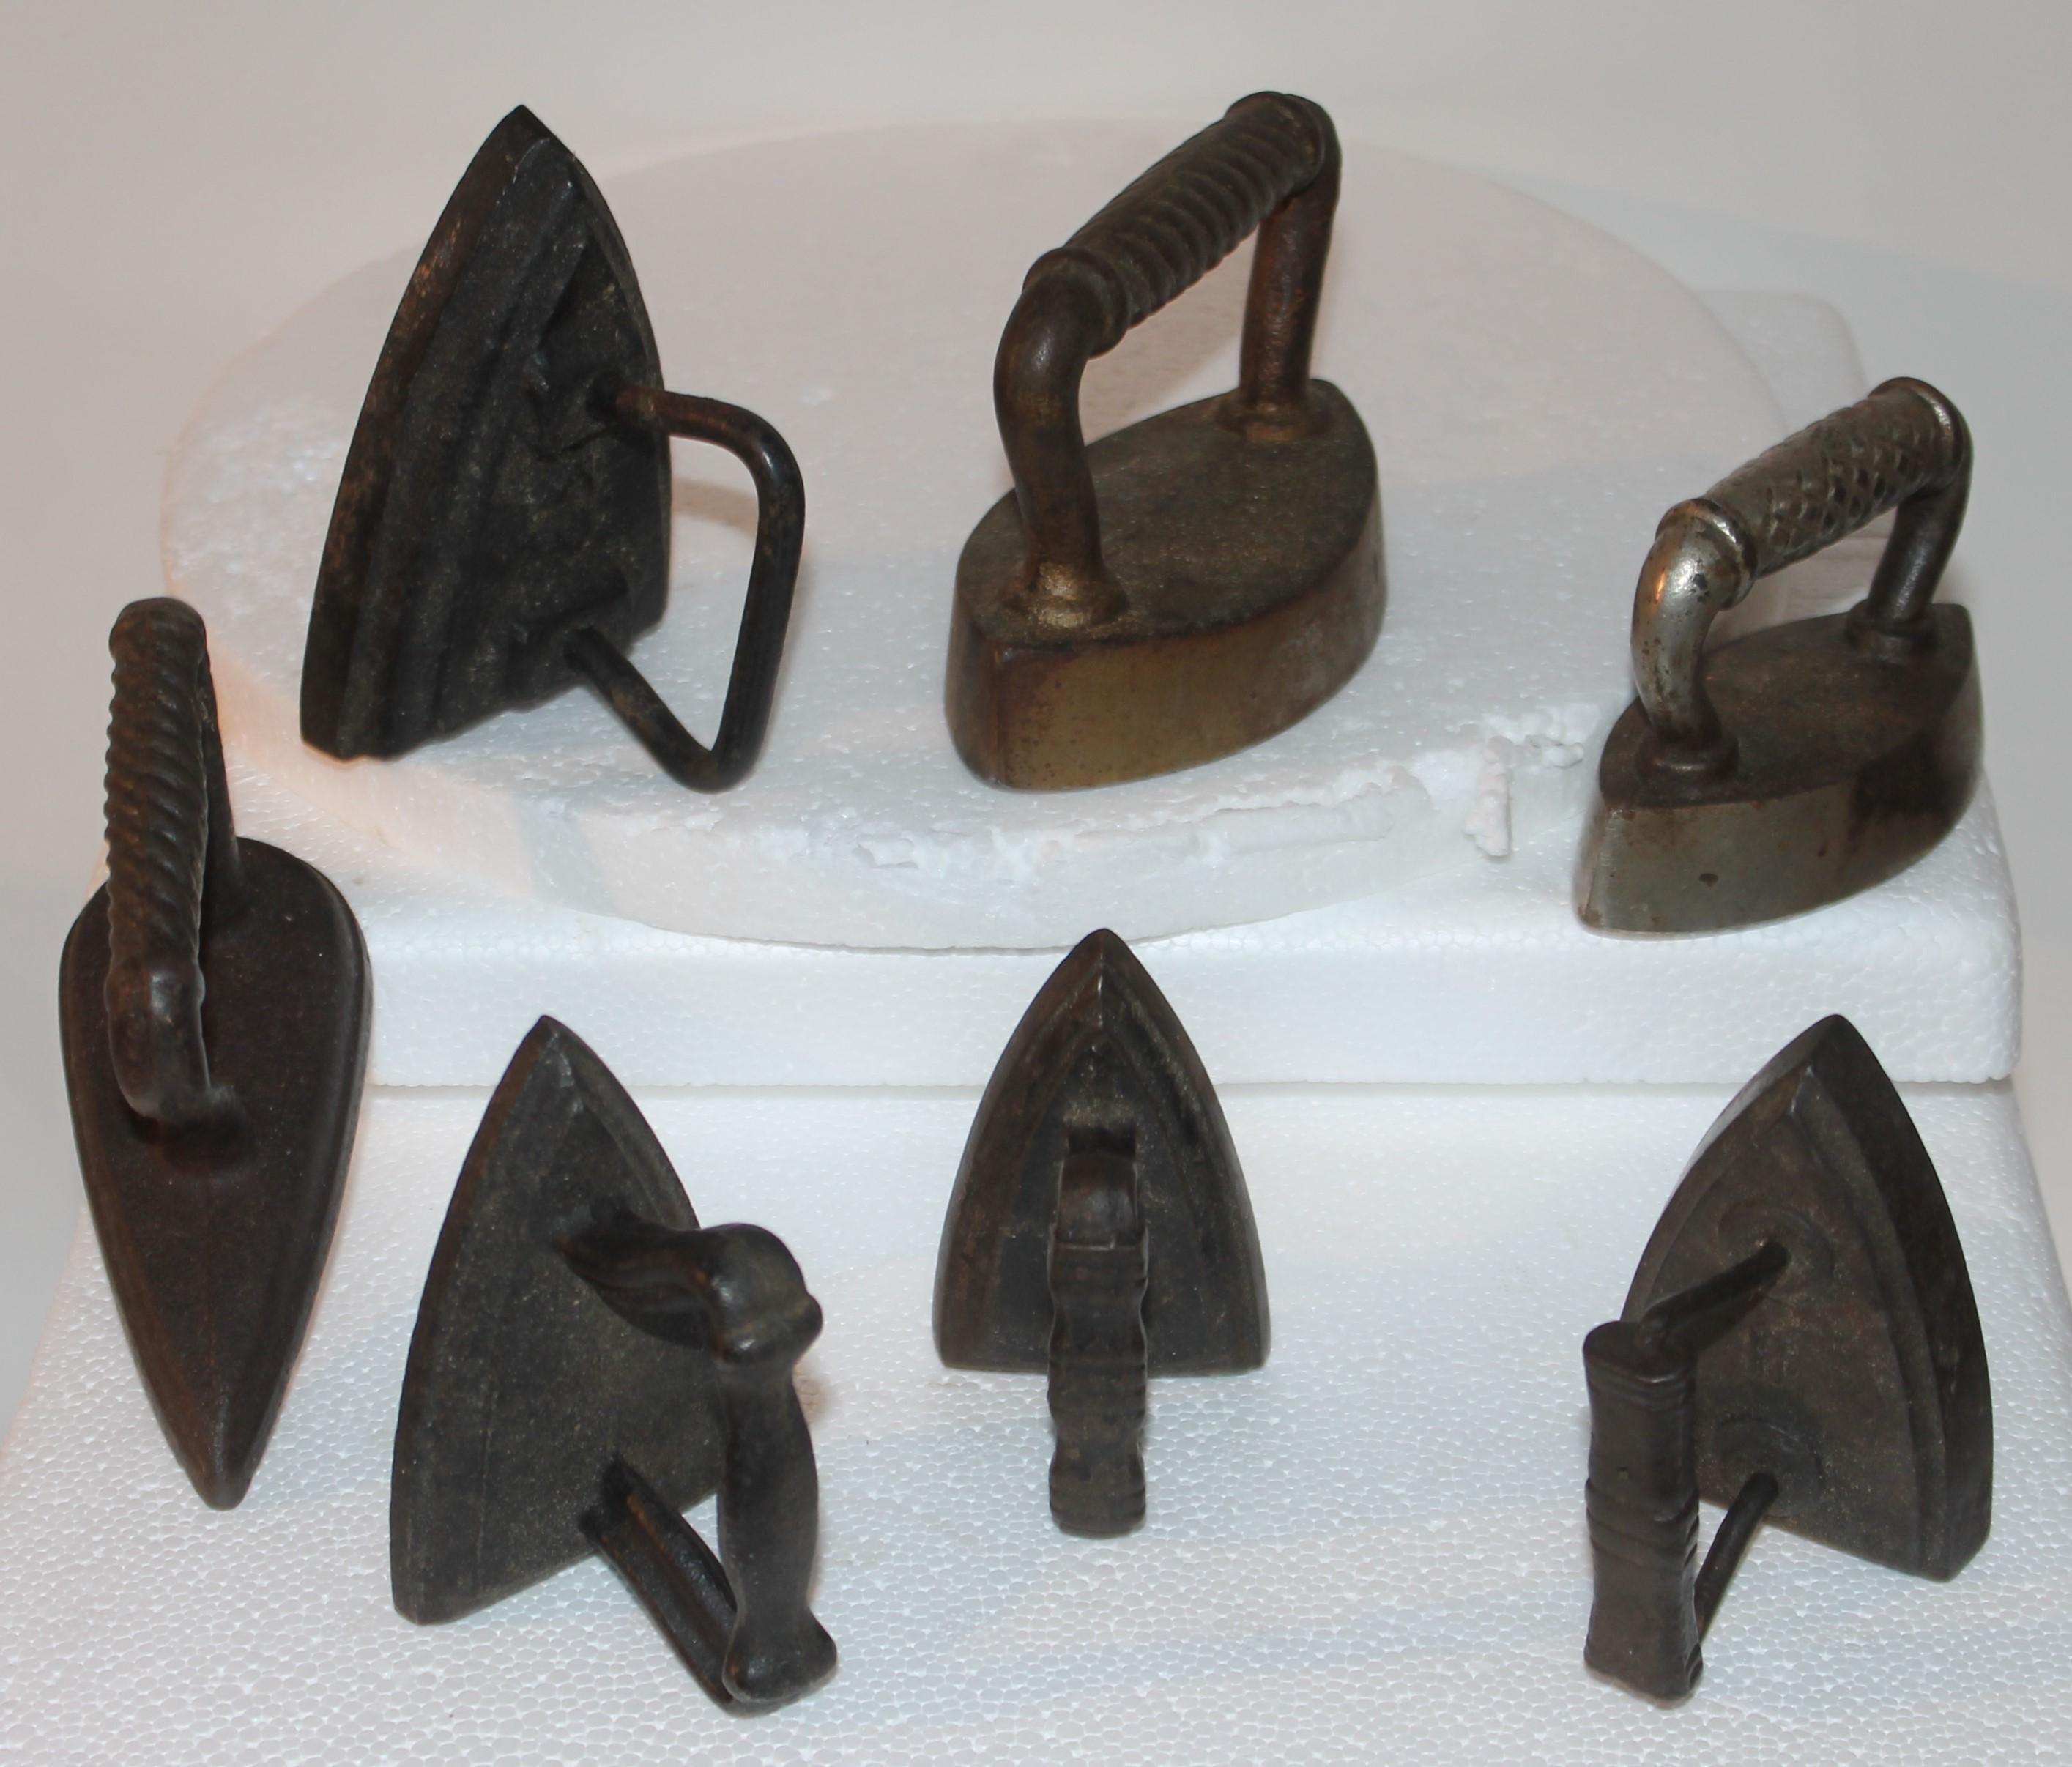 This fun collection of 19thc cast iron irons are most unusual and very hard to find. These irons were probably like salesman samples or children's.
largest miniature sat iron measures - 4.2 inches wide x 2 inches deep x 3.5 inches high
Smallest